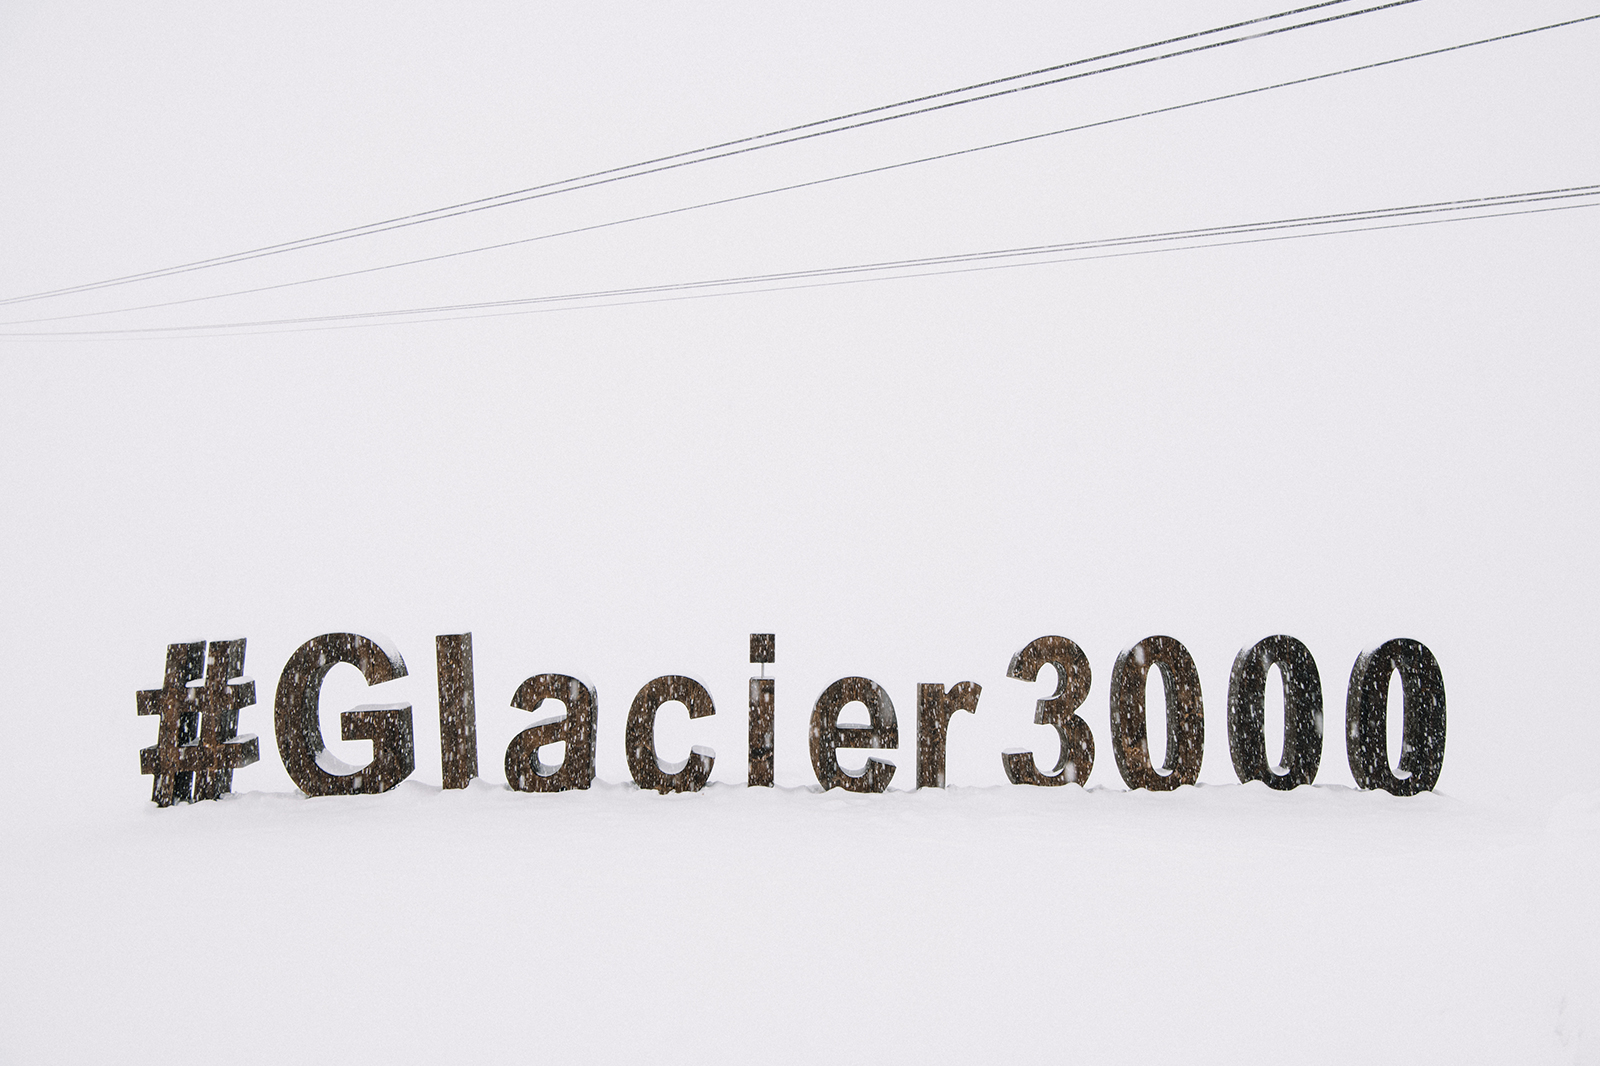 A writing in the snow: #Glacier3000